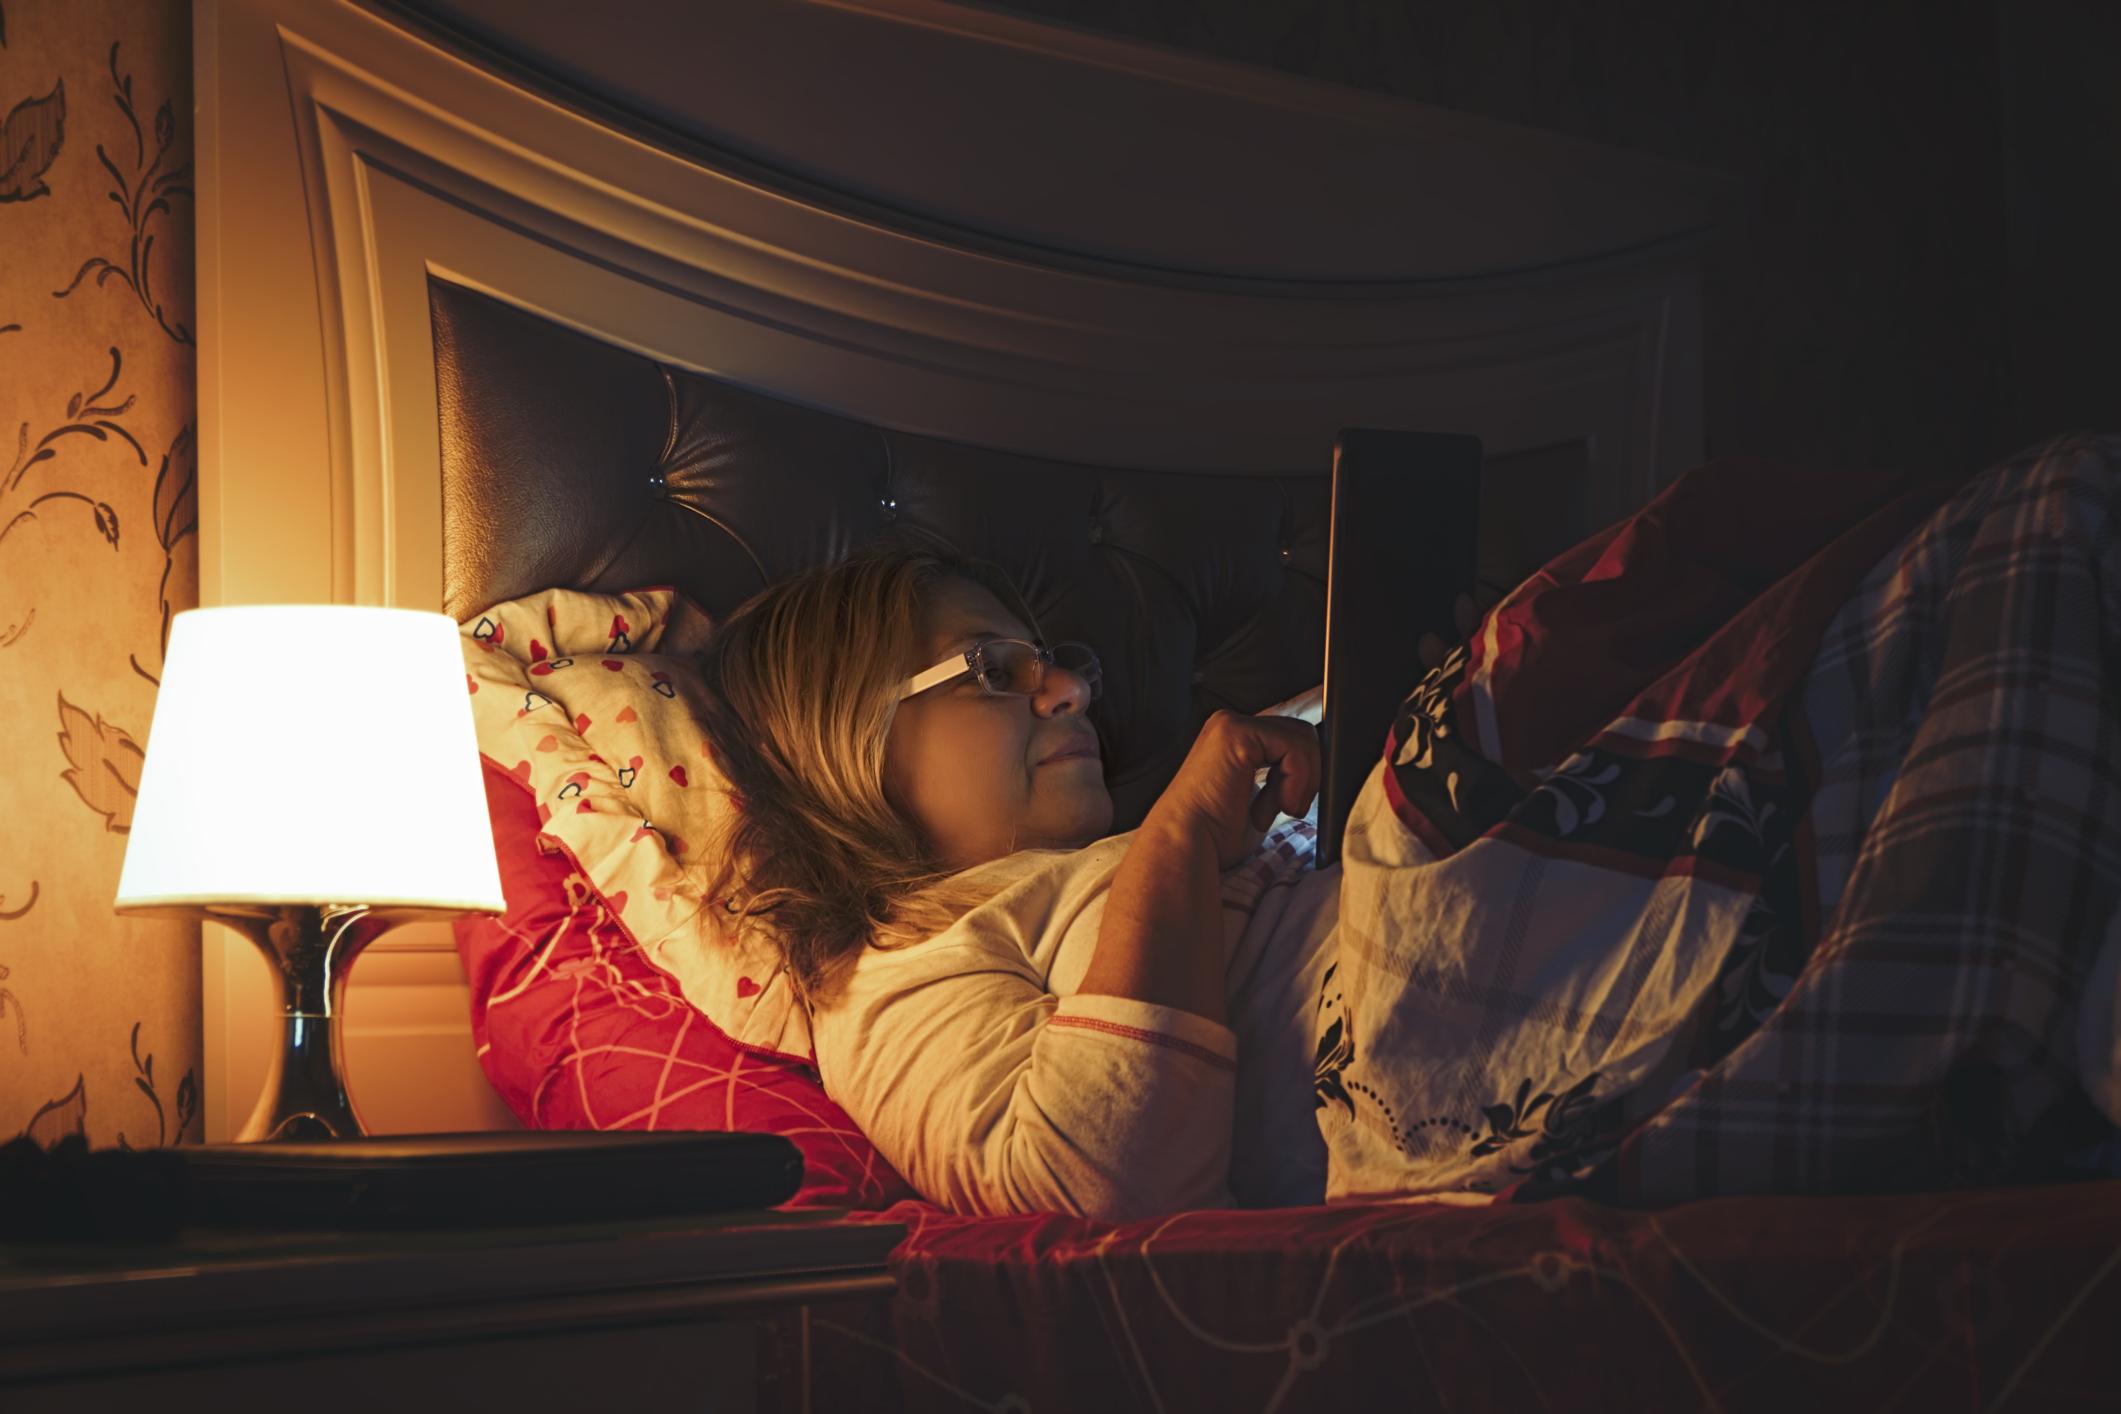 Busting the myths about screentime, blue light and sleep